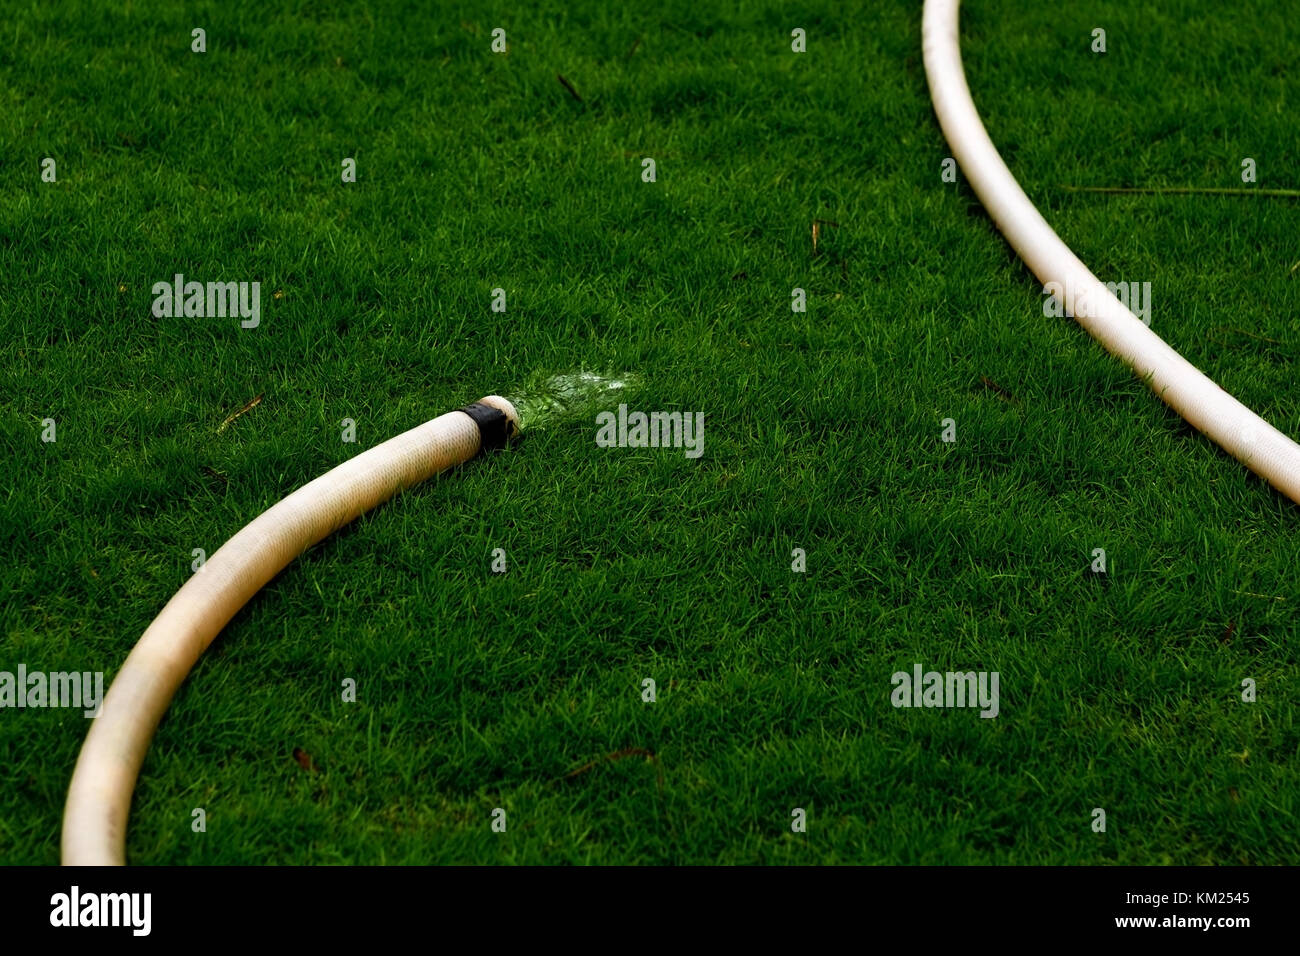 Hose for watering the grass in a sunny dry day. Water pours on the lawn. Stock Photo